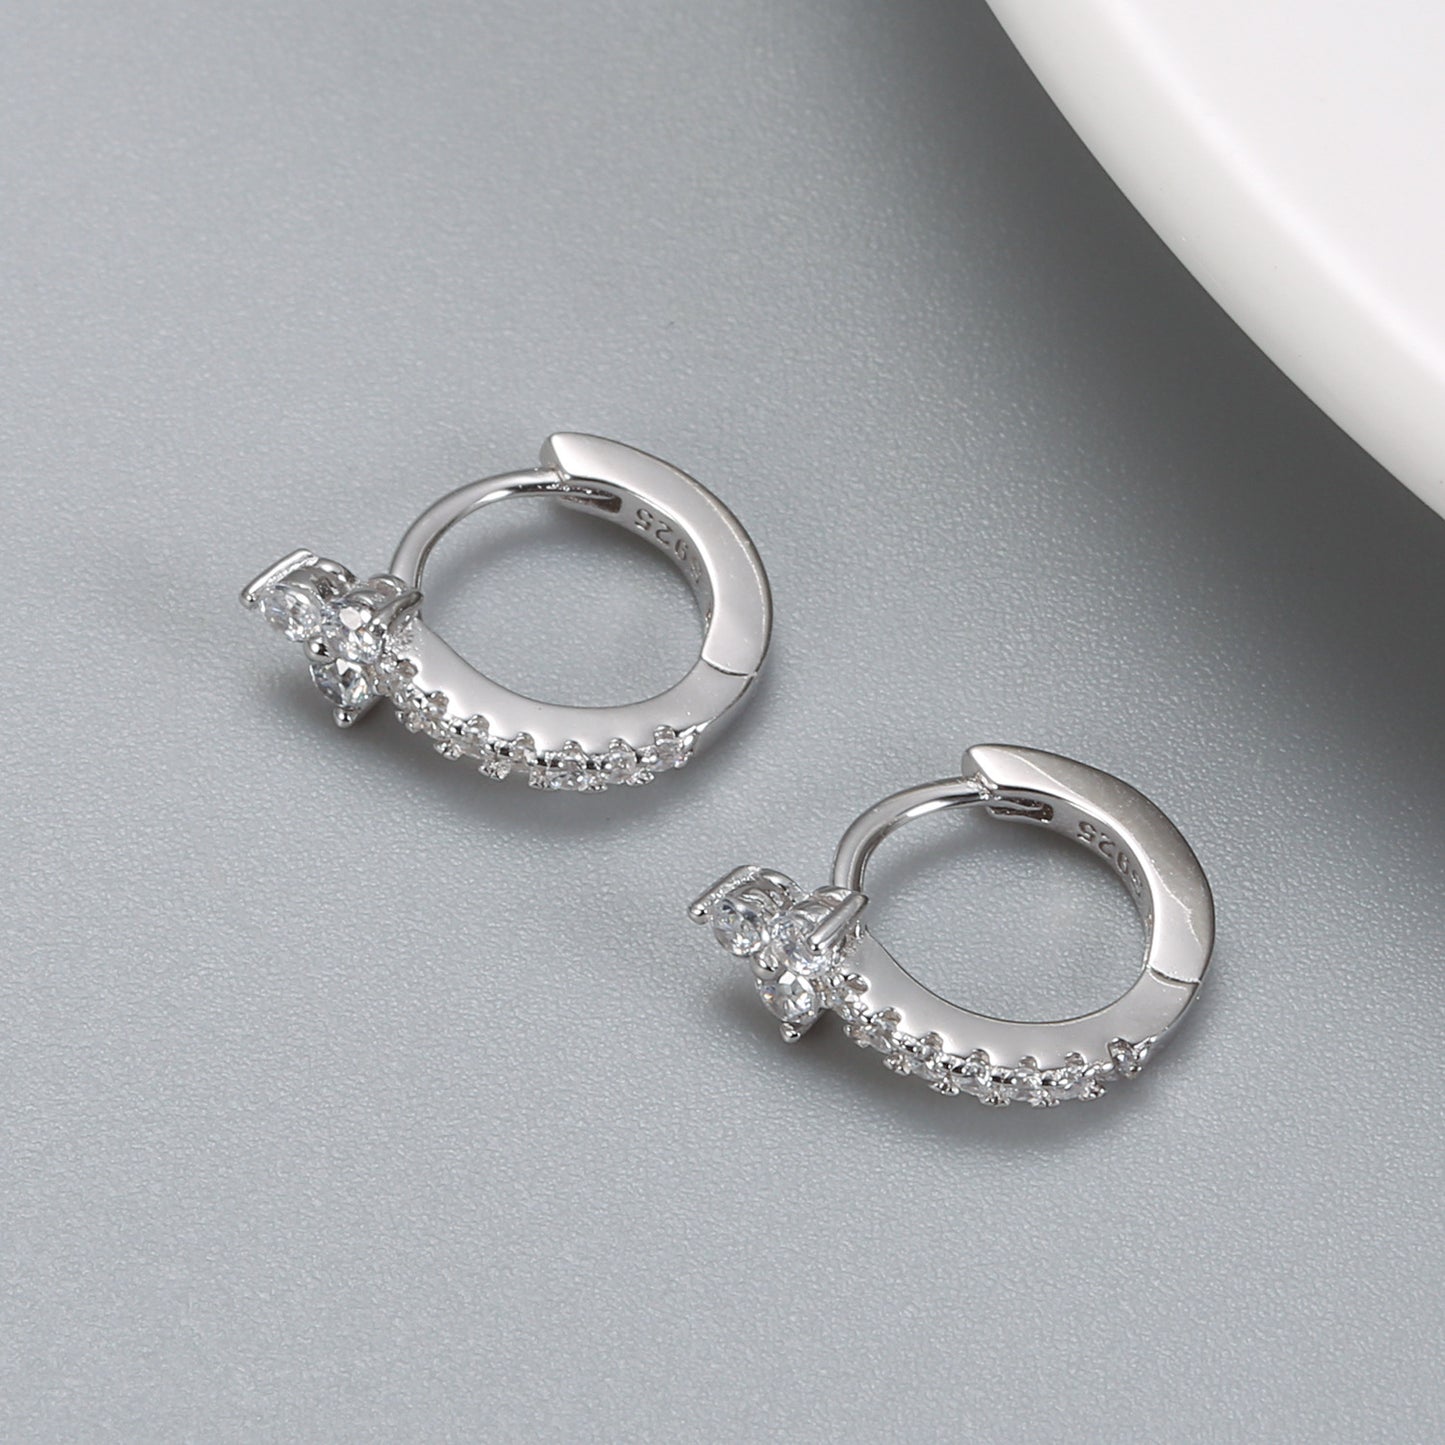 Baby and Children's Earrings  Sterling Silver Clear CZ Huggies with Flower